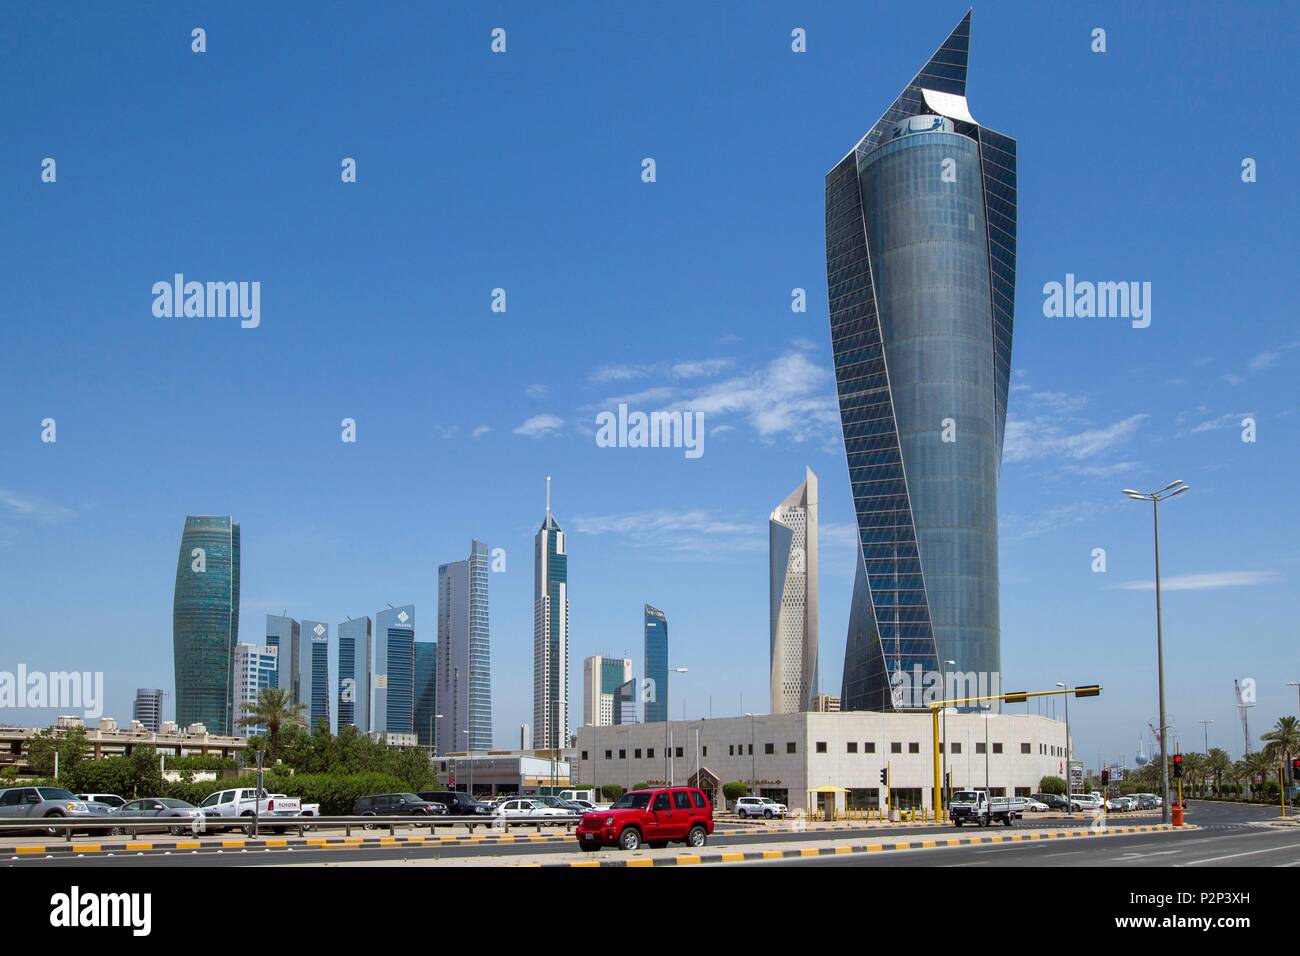 Kuwait, Persian Gulf, Kuwait City, Al Tijaria tower with AL Hamra tower in background in Central Business district Stock Photo